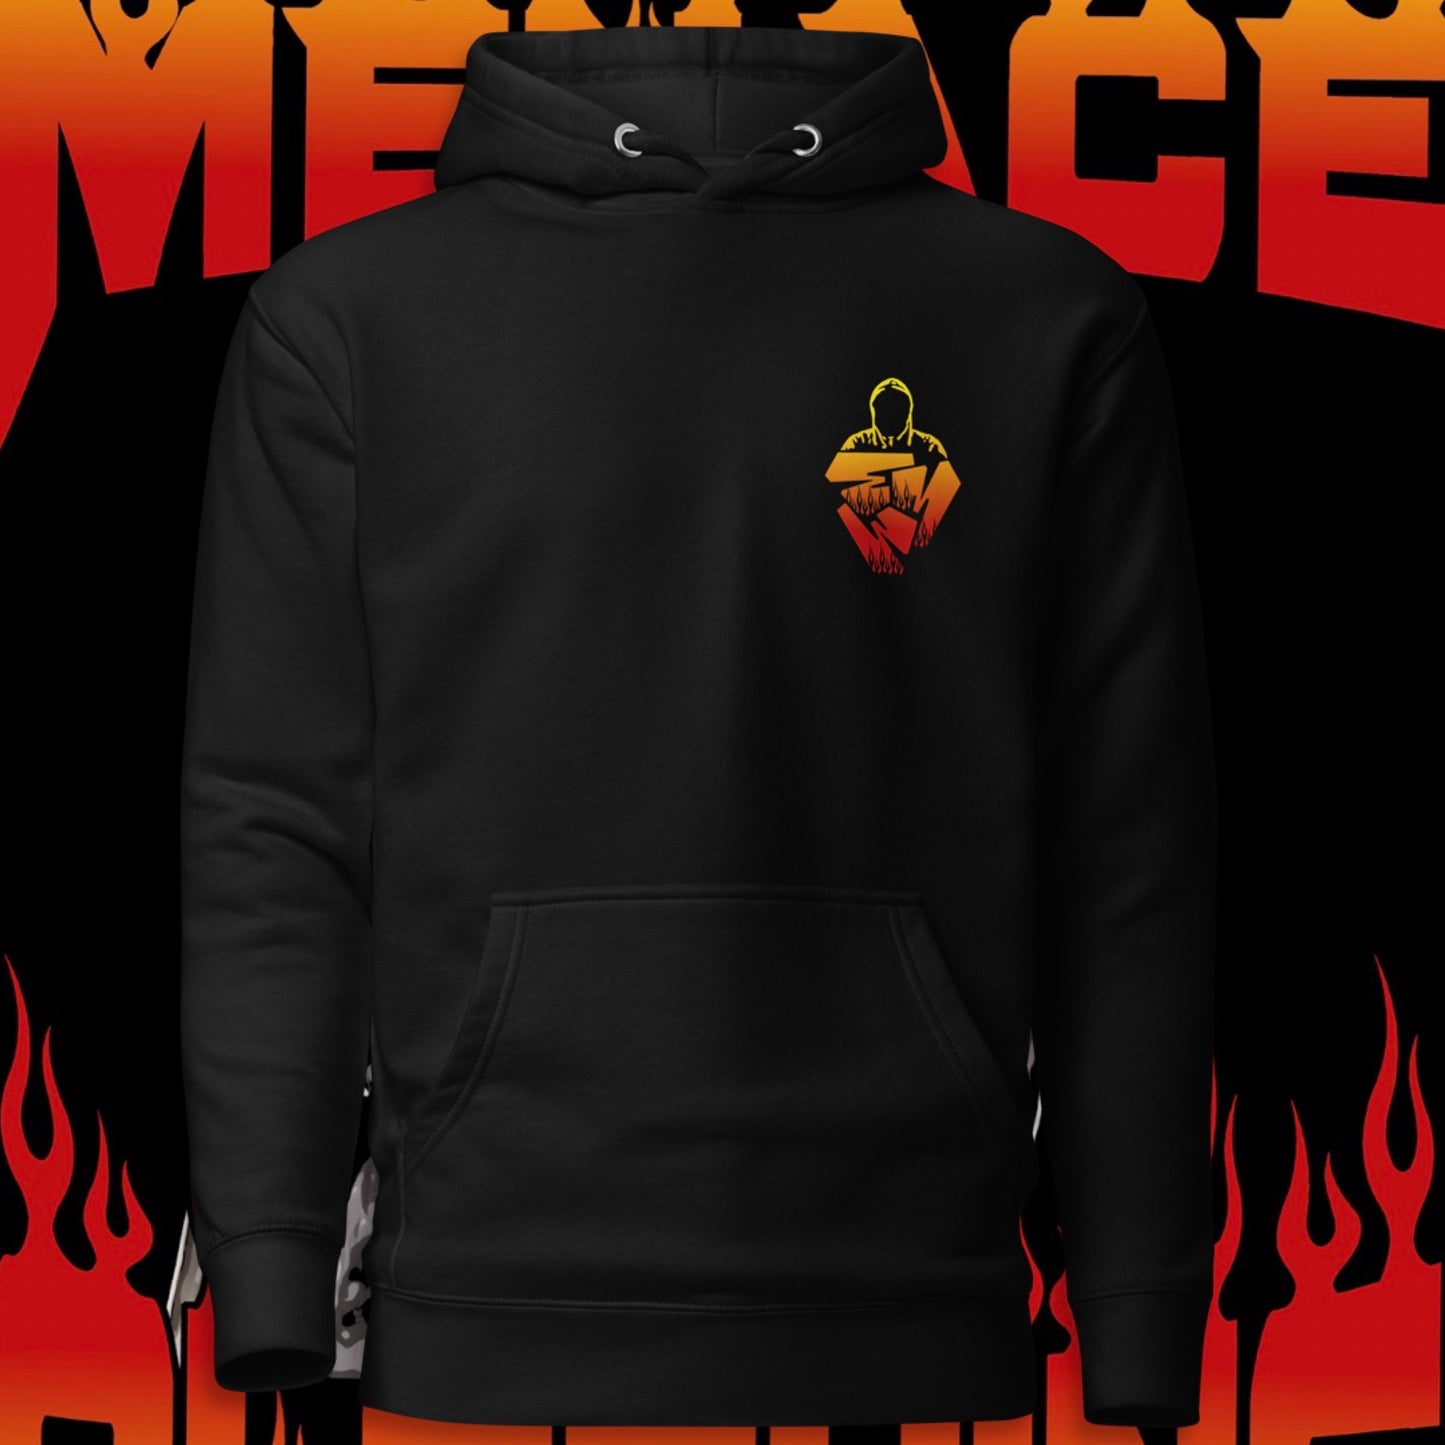 Menace Clothing Crow Hoodie. Black hoodie with Menace Clothing Tri M logo on front left chest of the hoodie.